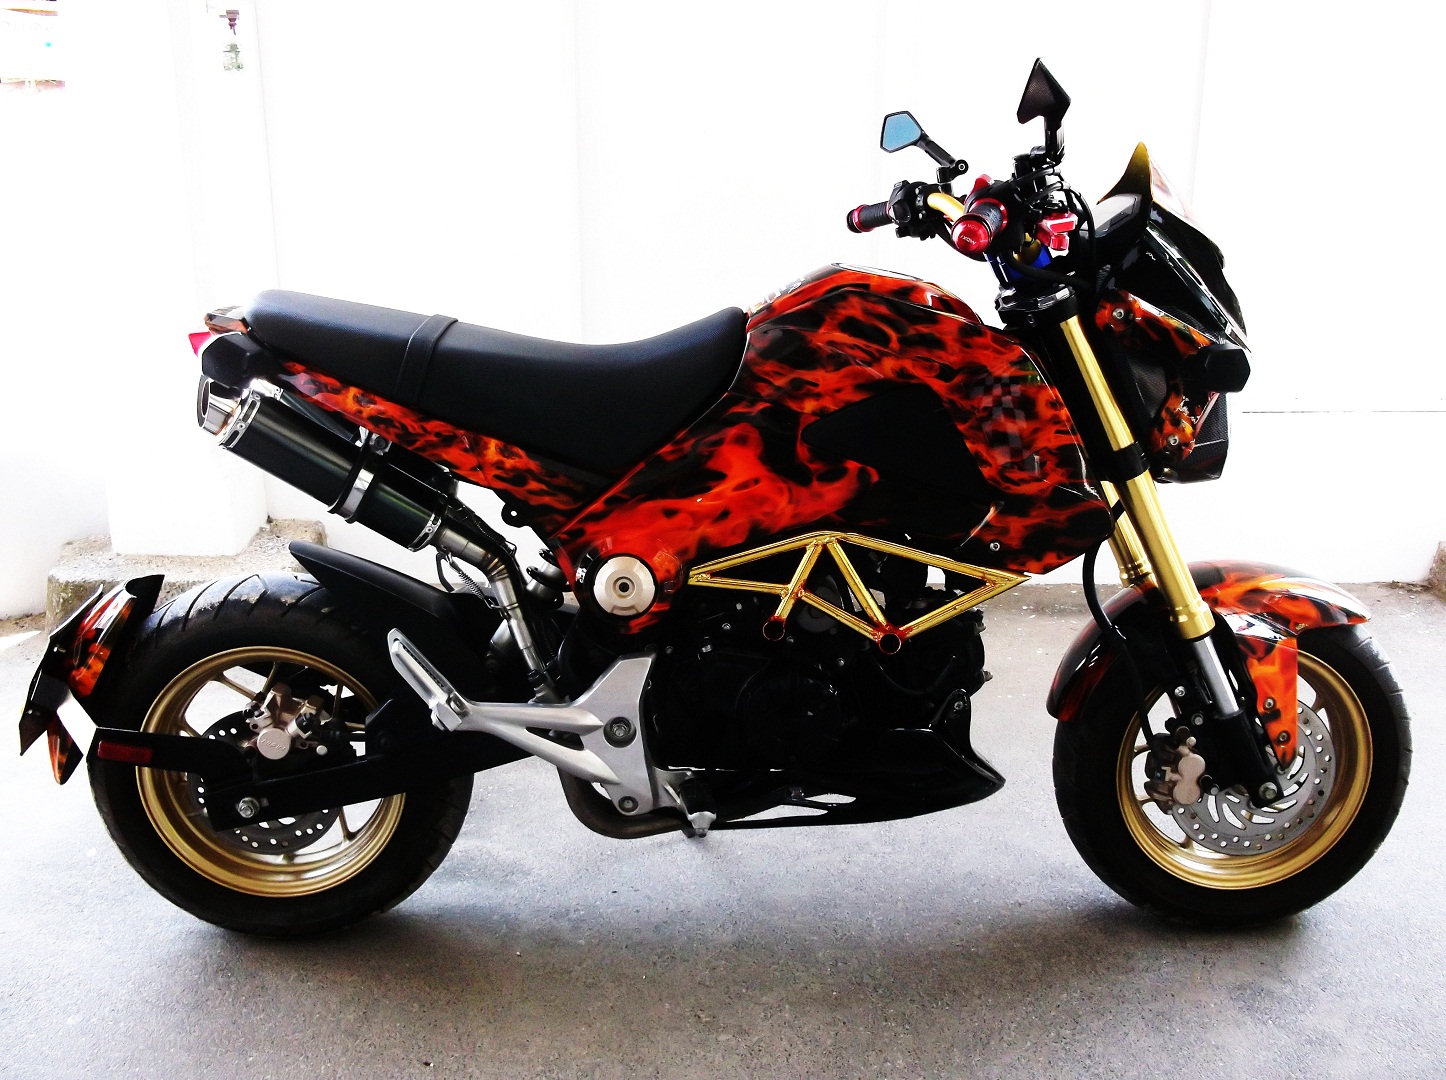 This is a Honda MSX 125 Grom, Hydro dipped in true flames with mini skulls. Has some after market upgrades too, dual exhaust, bottom scoop and top fairing.